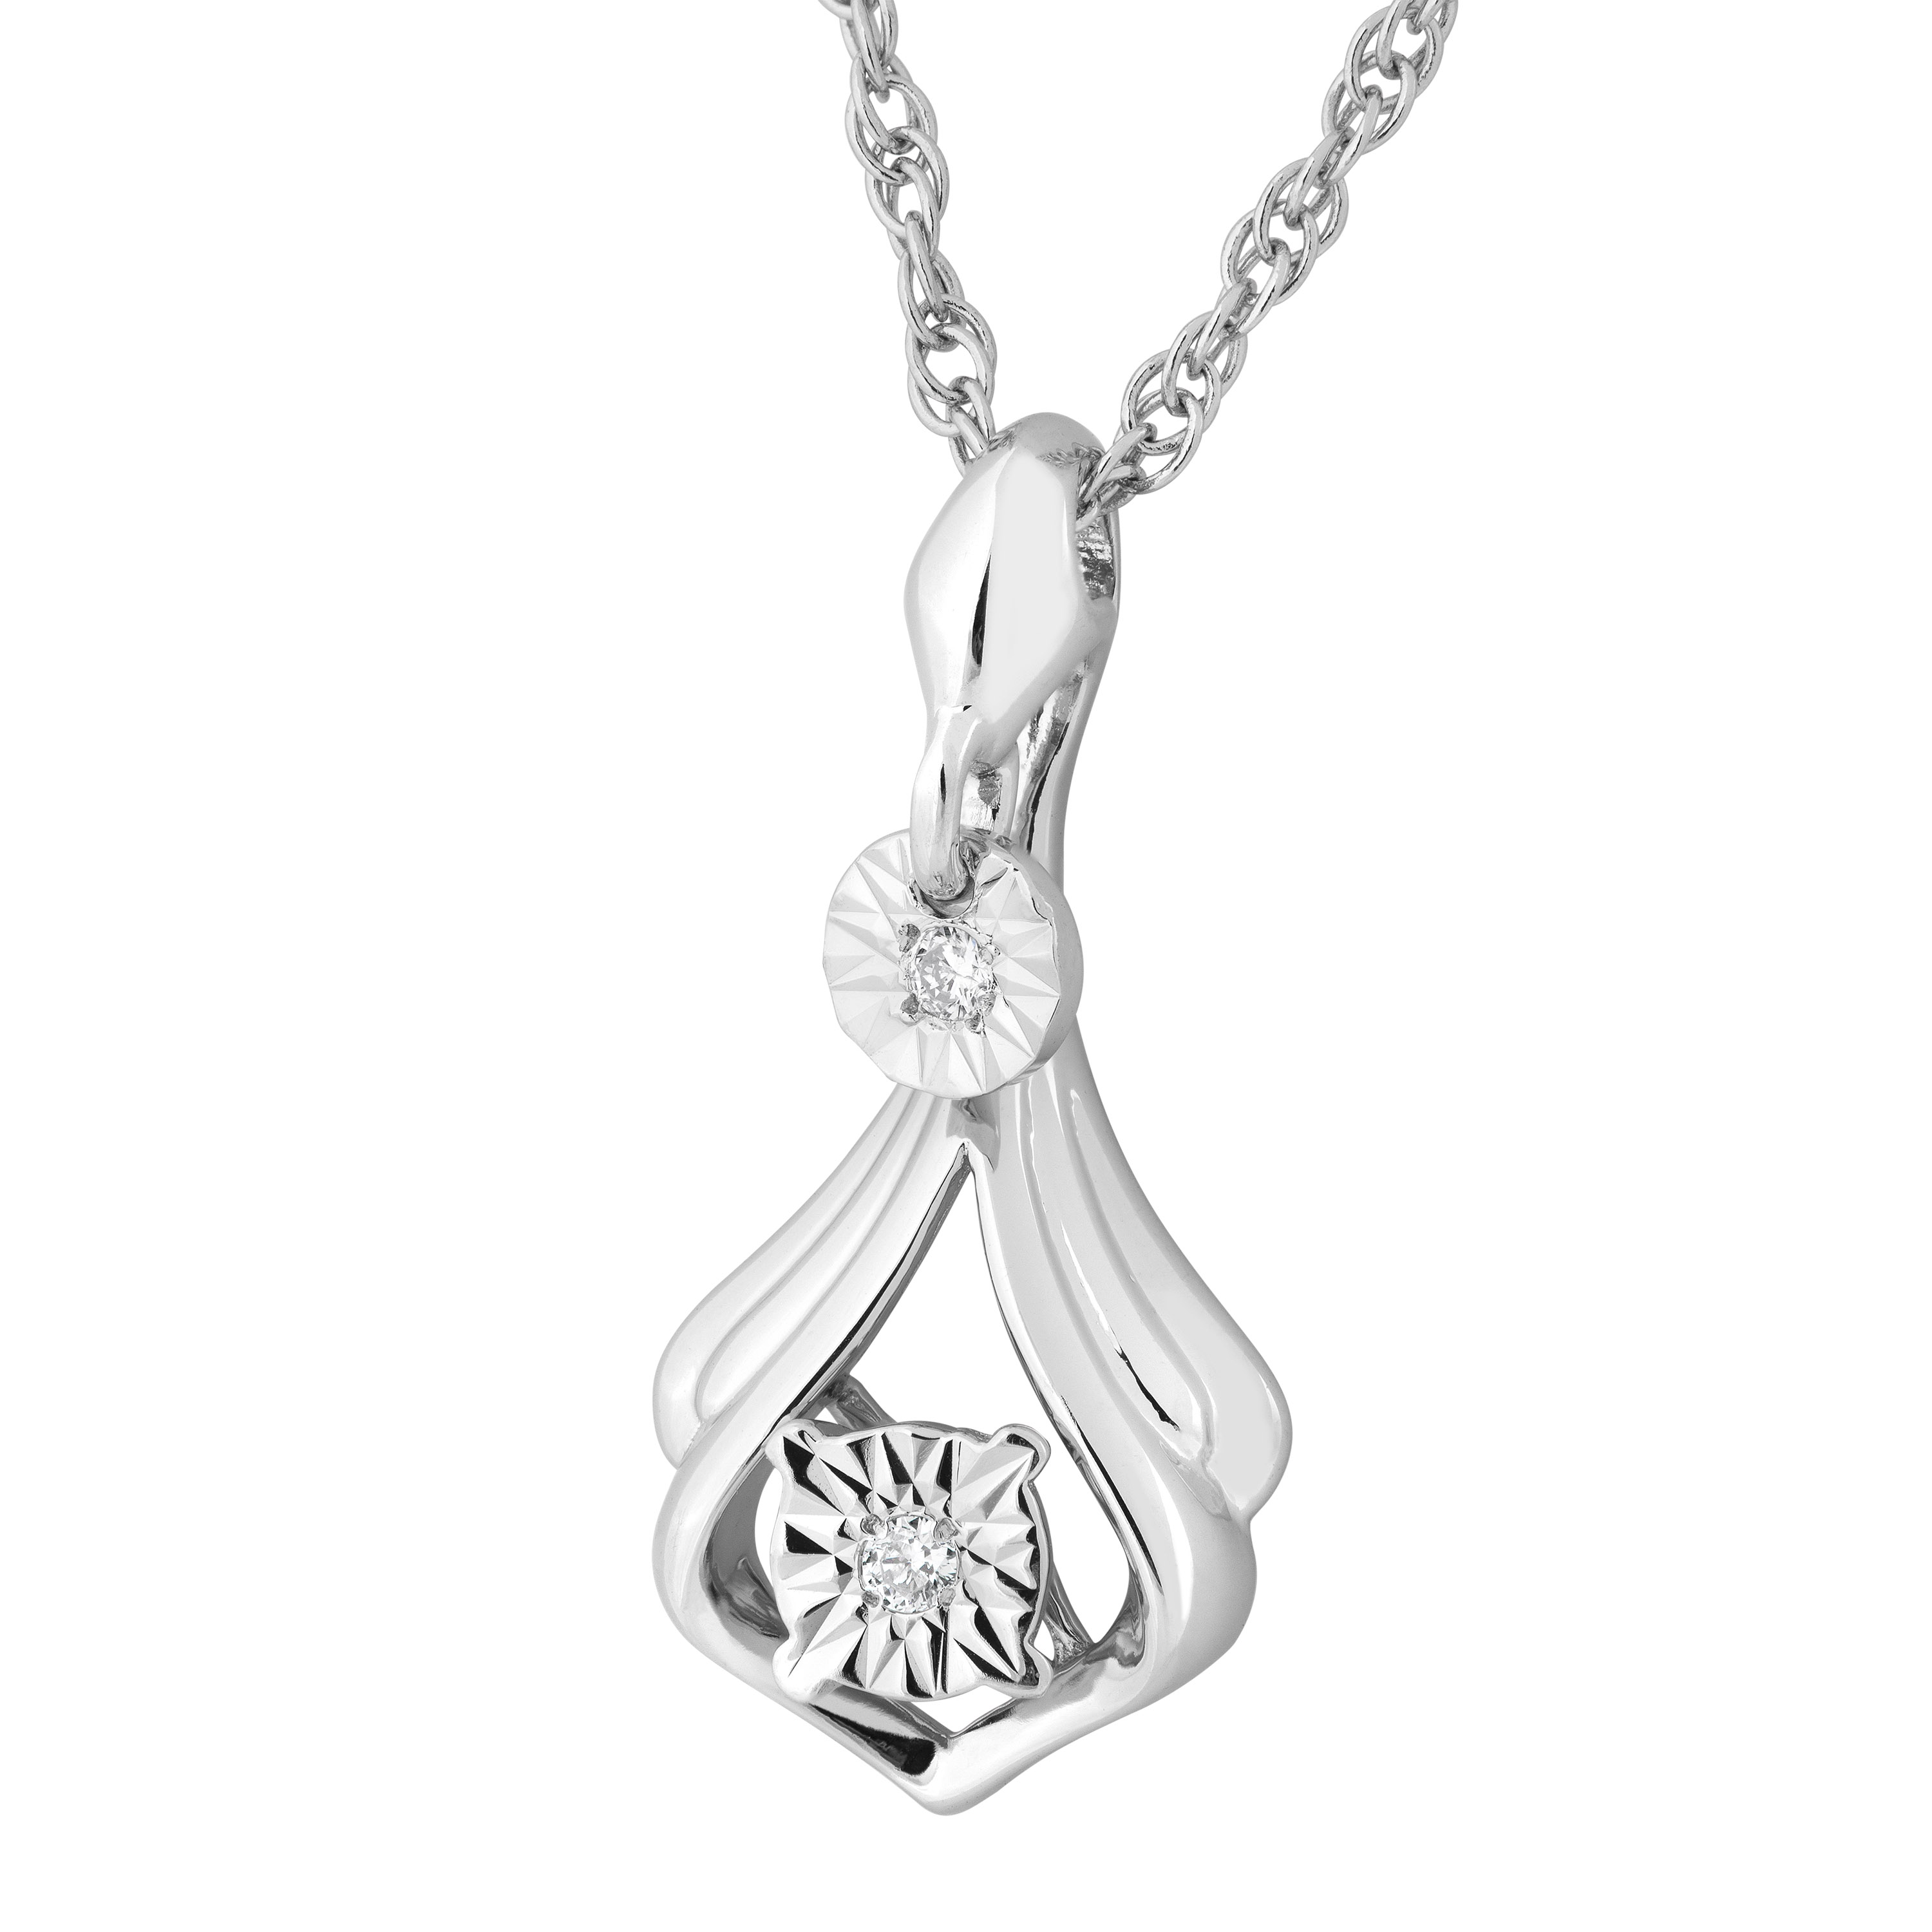 Diamond Pear Pendant Necklace, Sterling Silver. 